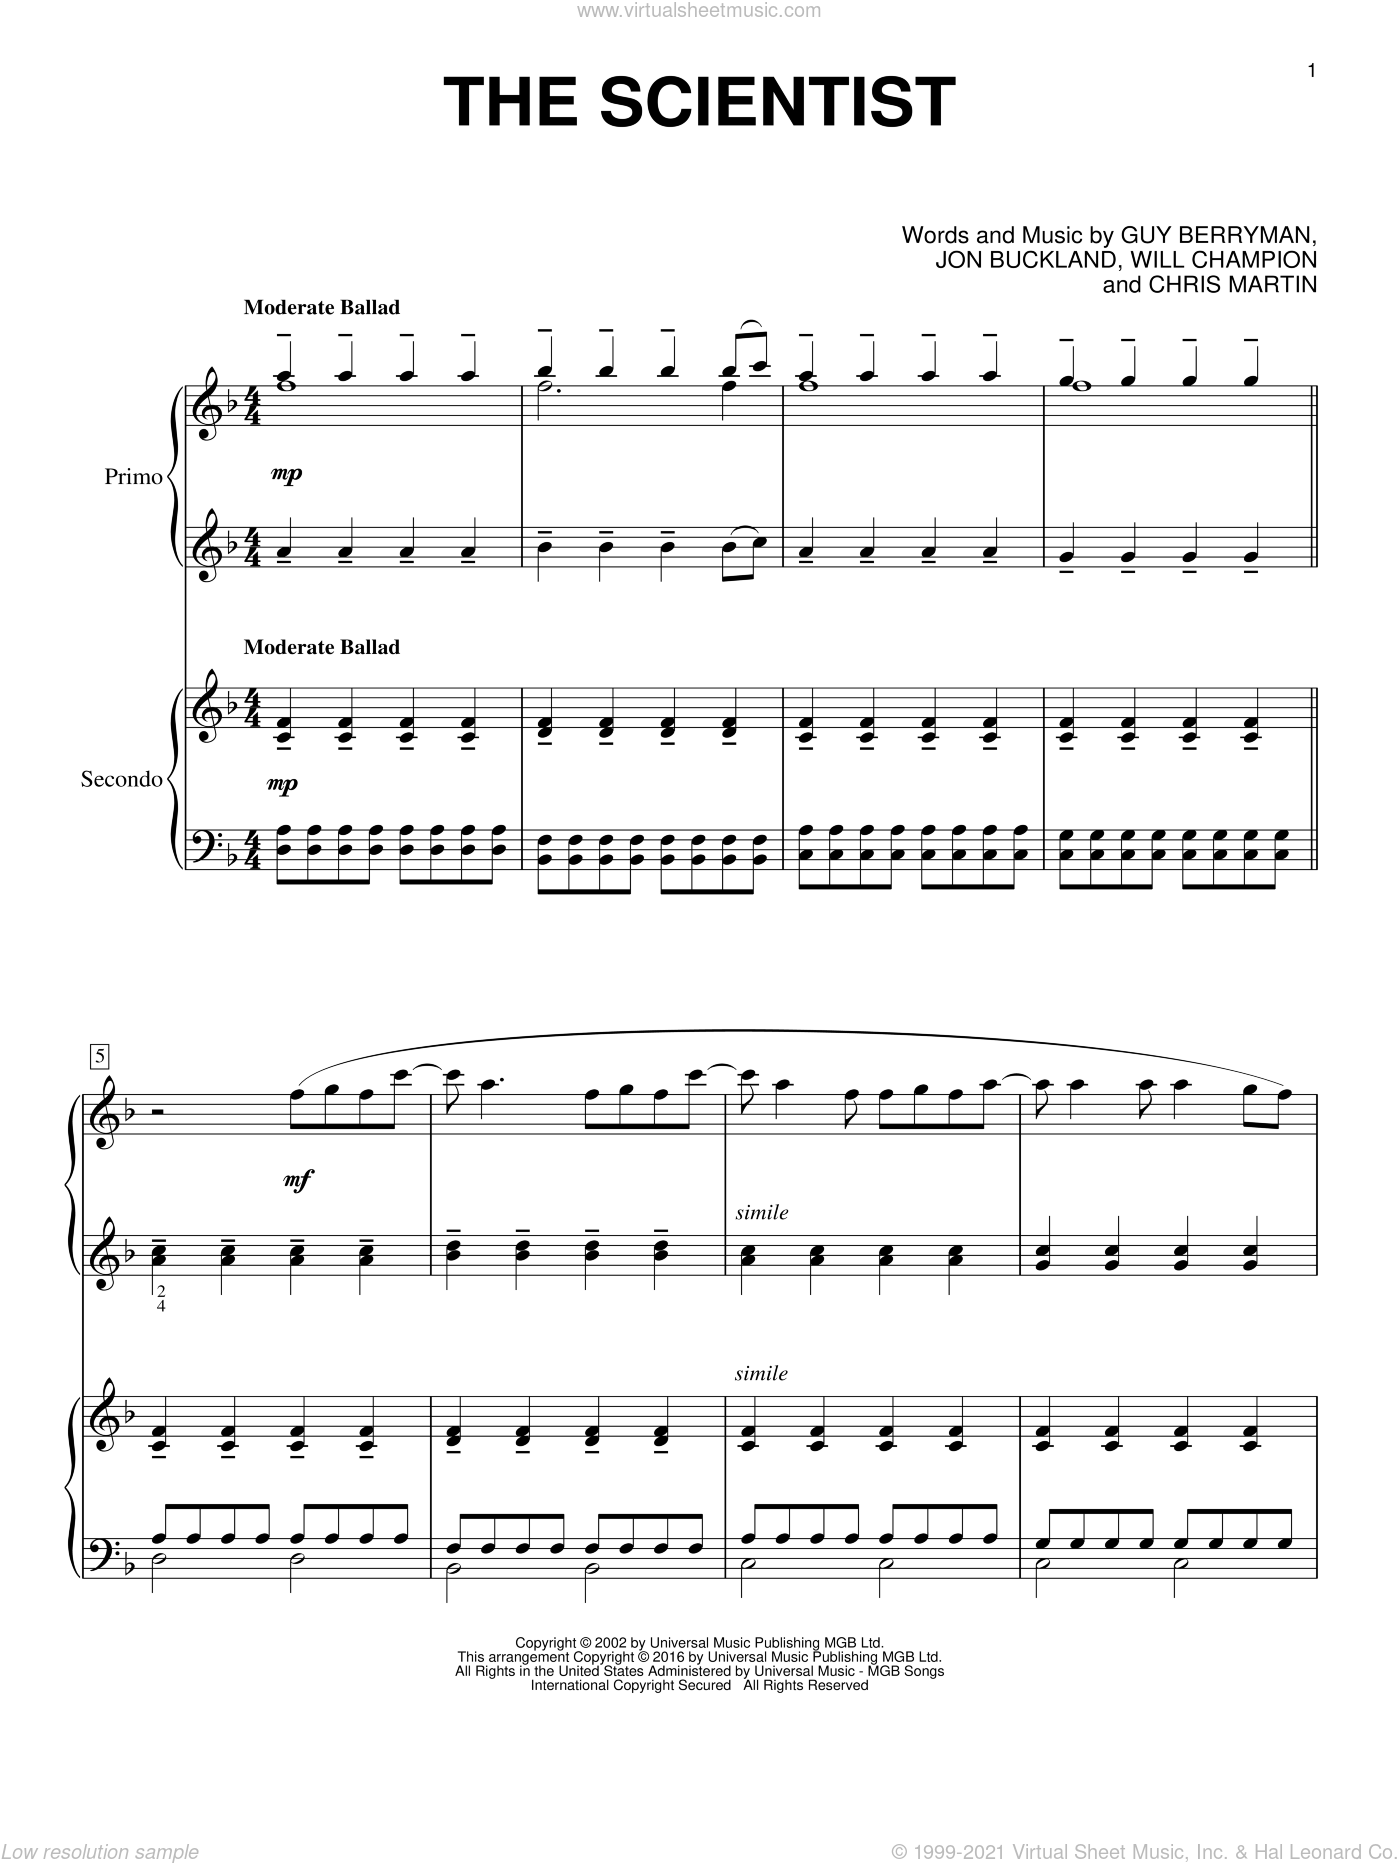 Coldplay - The Scientist sheet music for piano four hands [PDF]